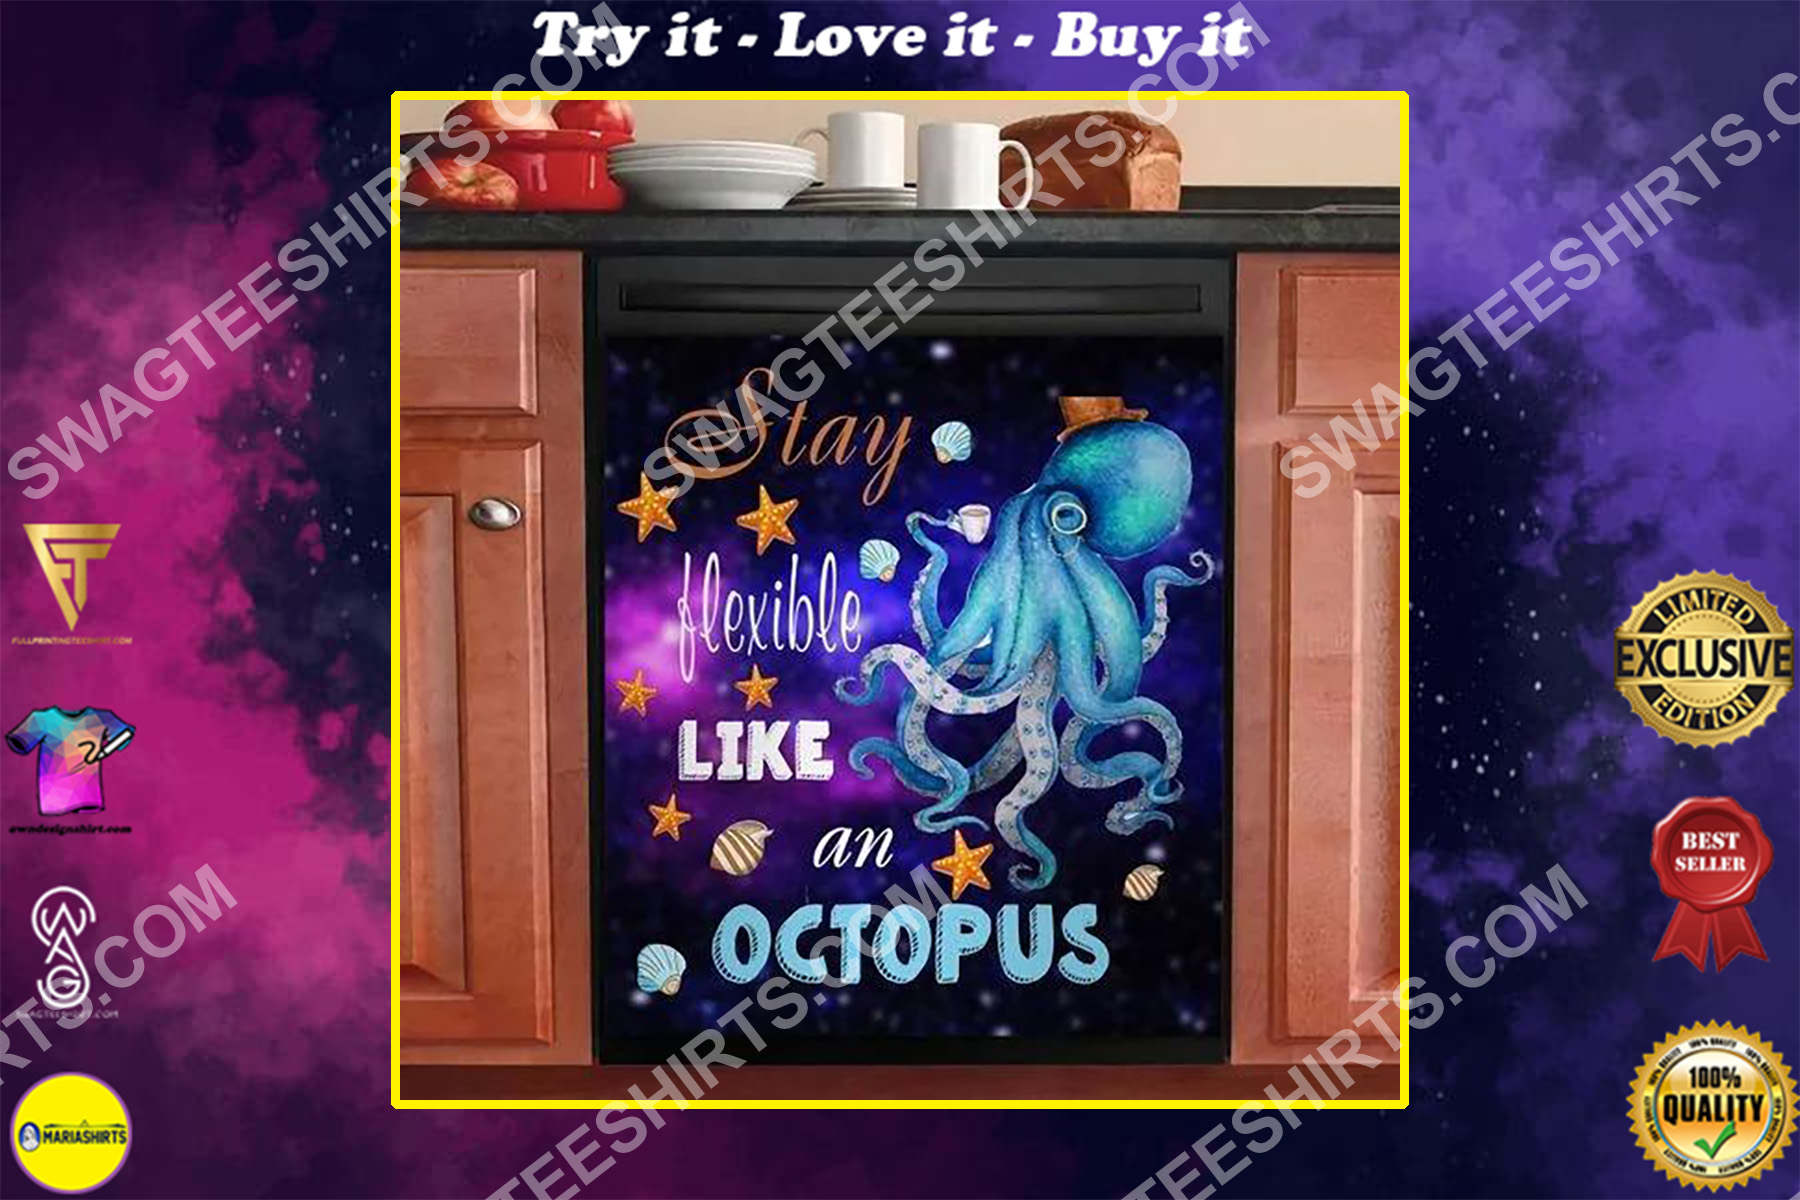 flexible like an octopus kitchen decorative dishwasher magnet cover